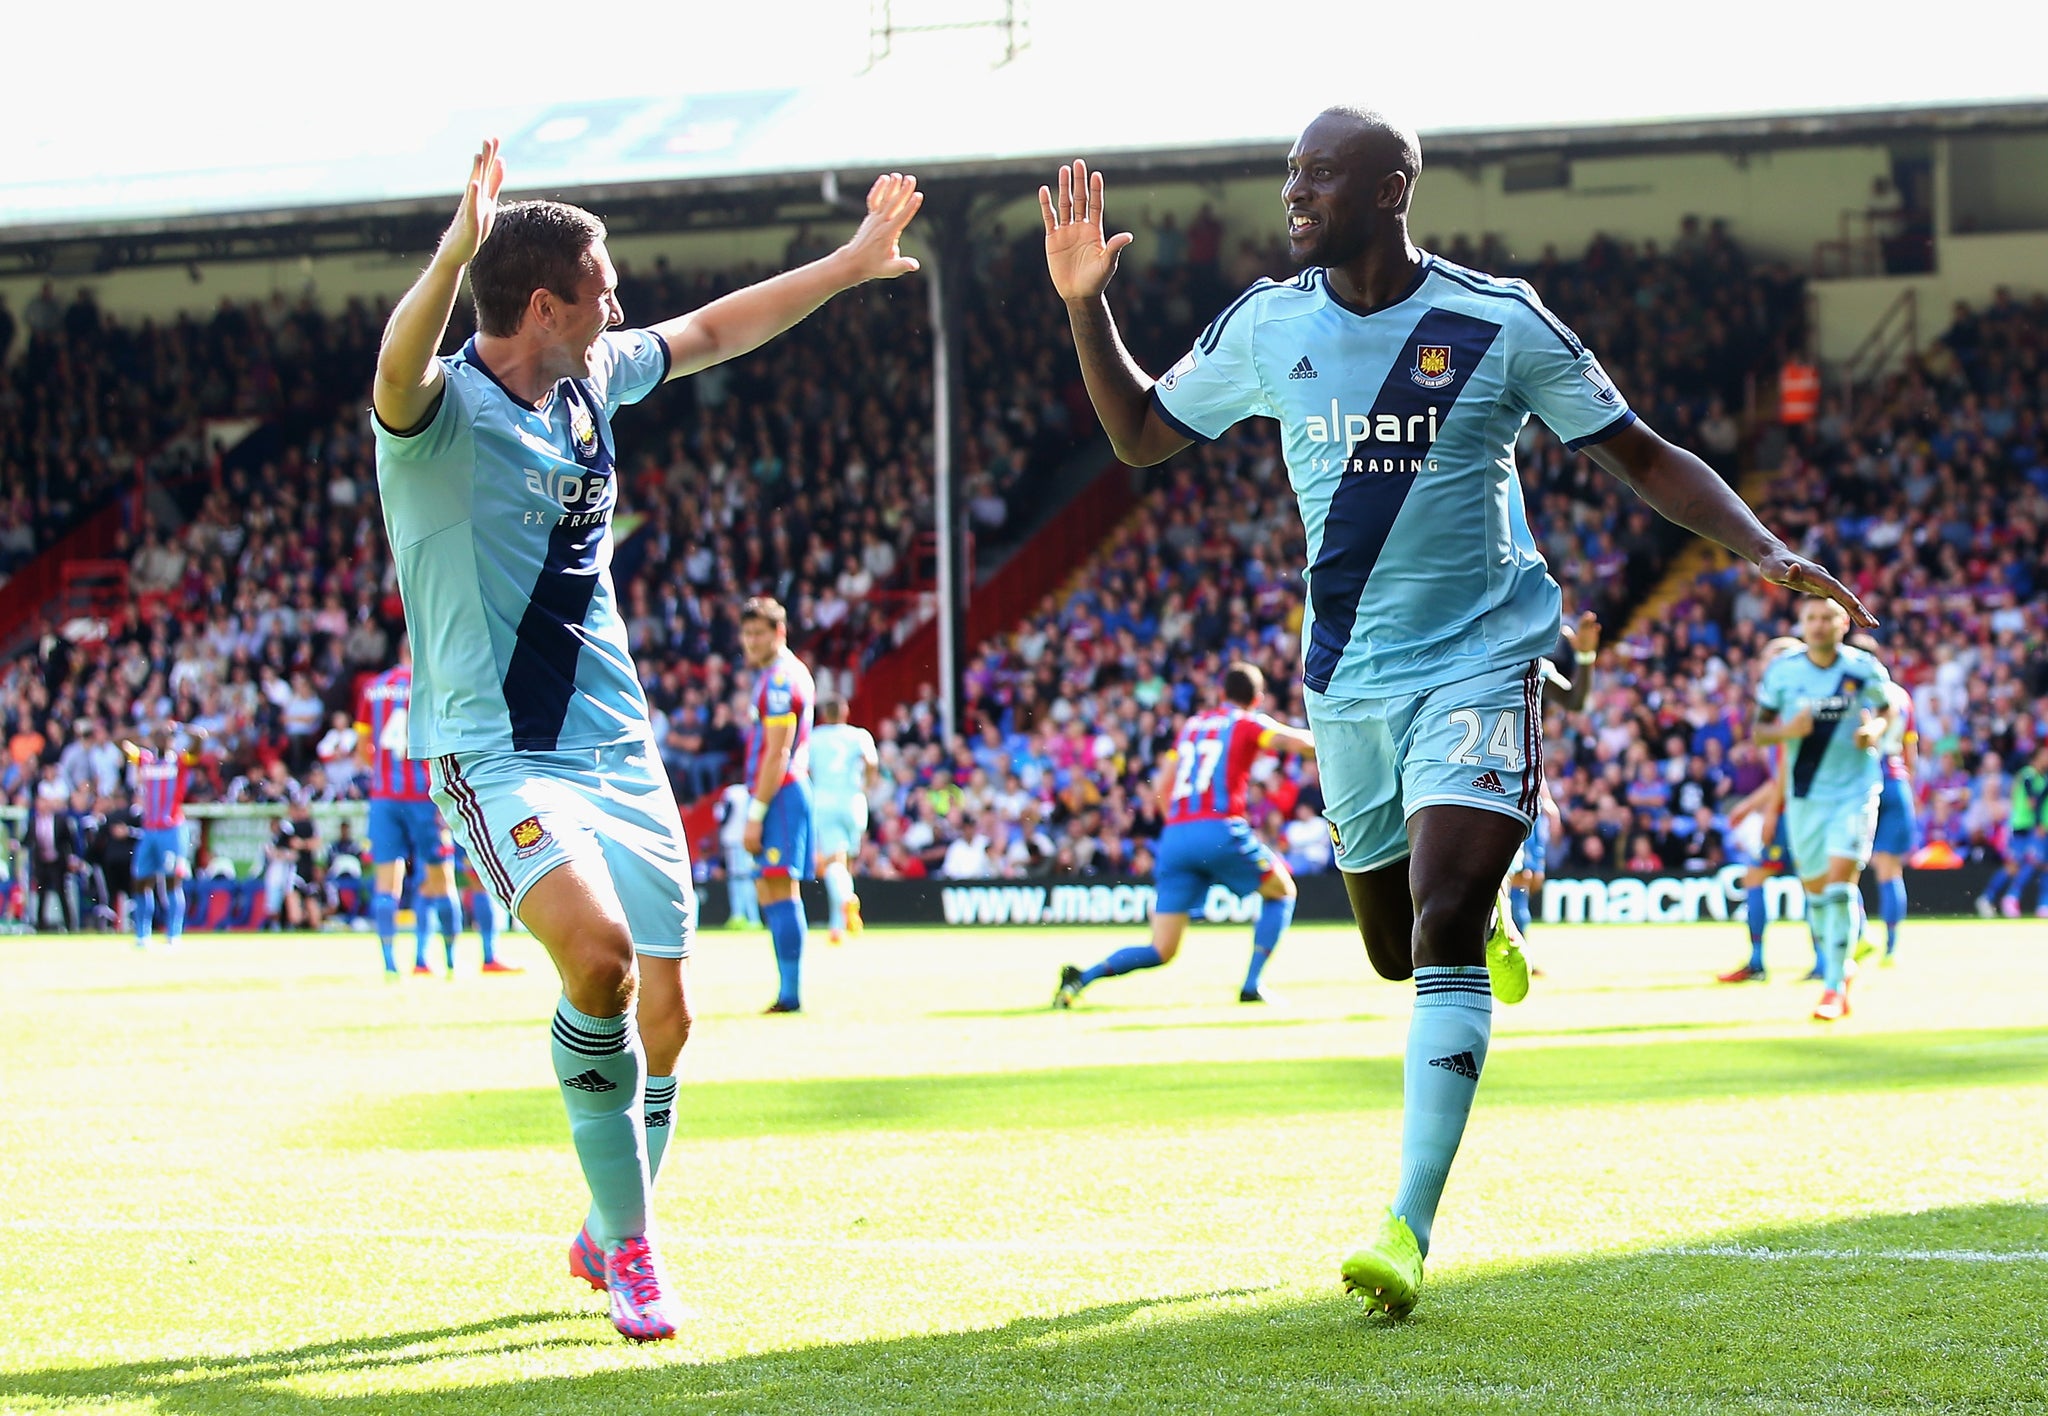 Carlton Cole resumes West Ham's two goal advantage after 62 minutes much to the dismay of the home supporters.